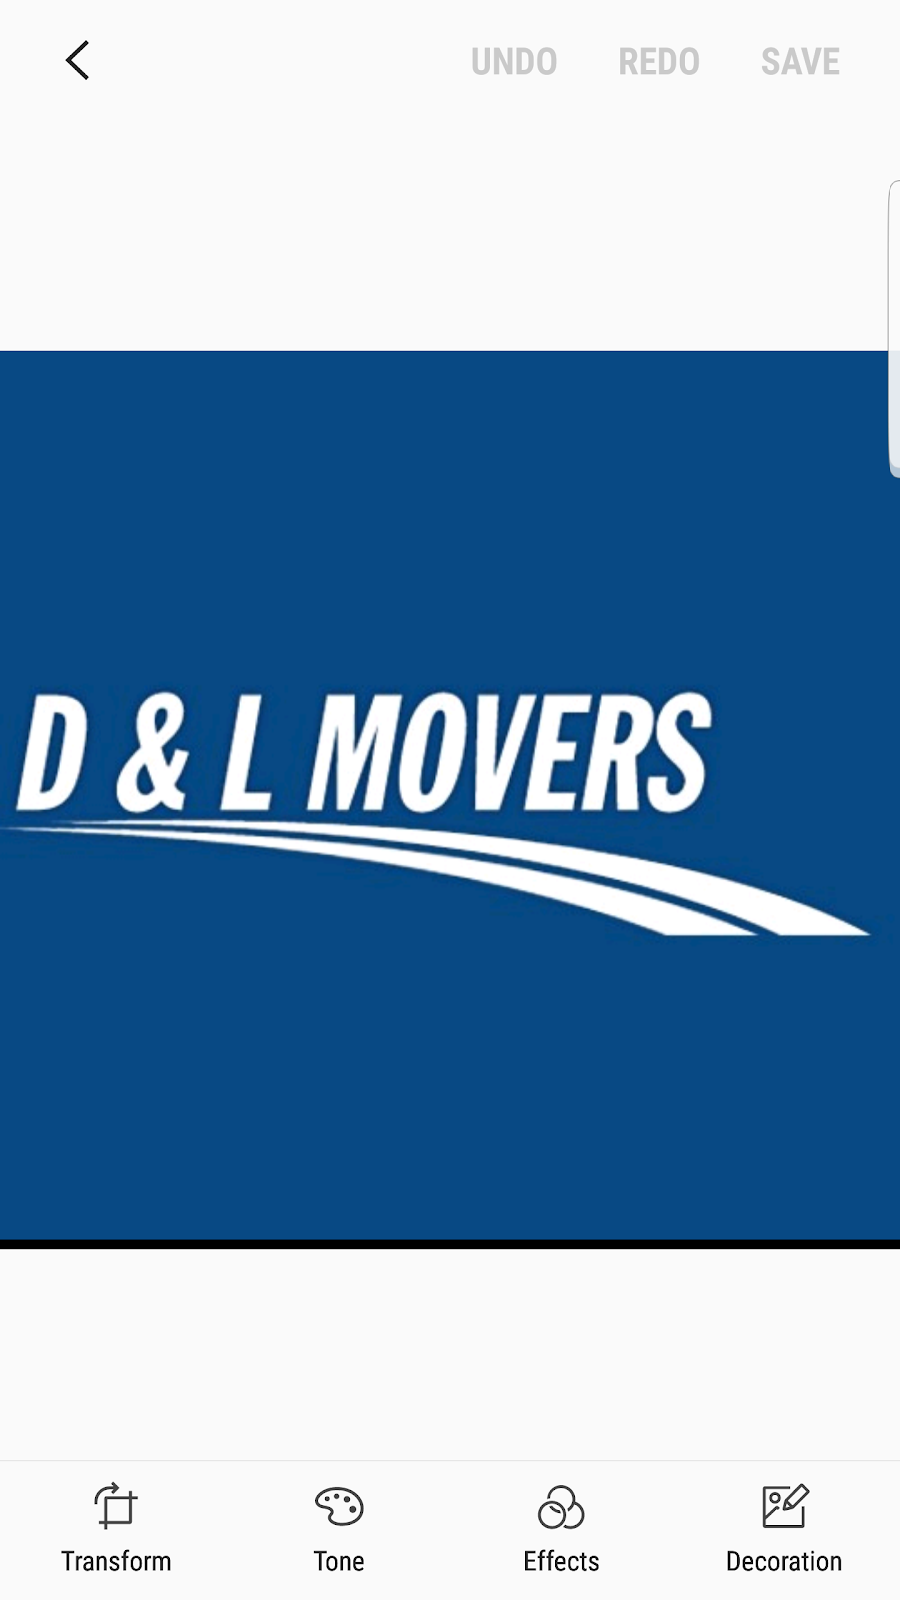 D & L movers packing and moving specialists | 321 W Ave G, Lancaster, CA 93534 | Phone: (661) 949-1077